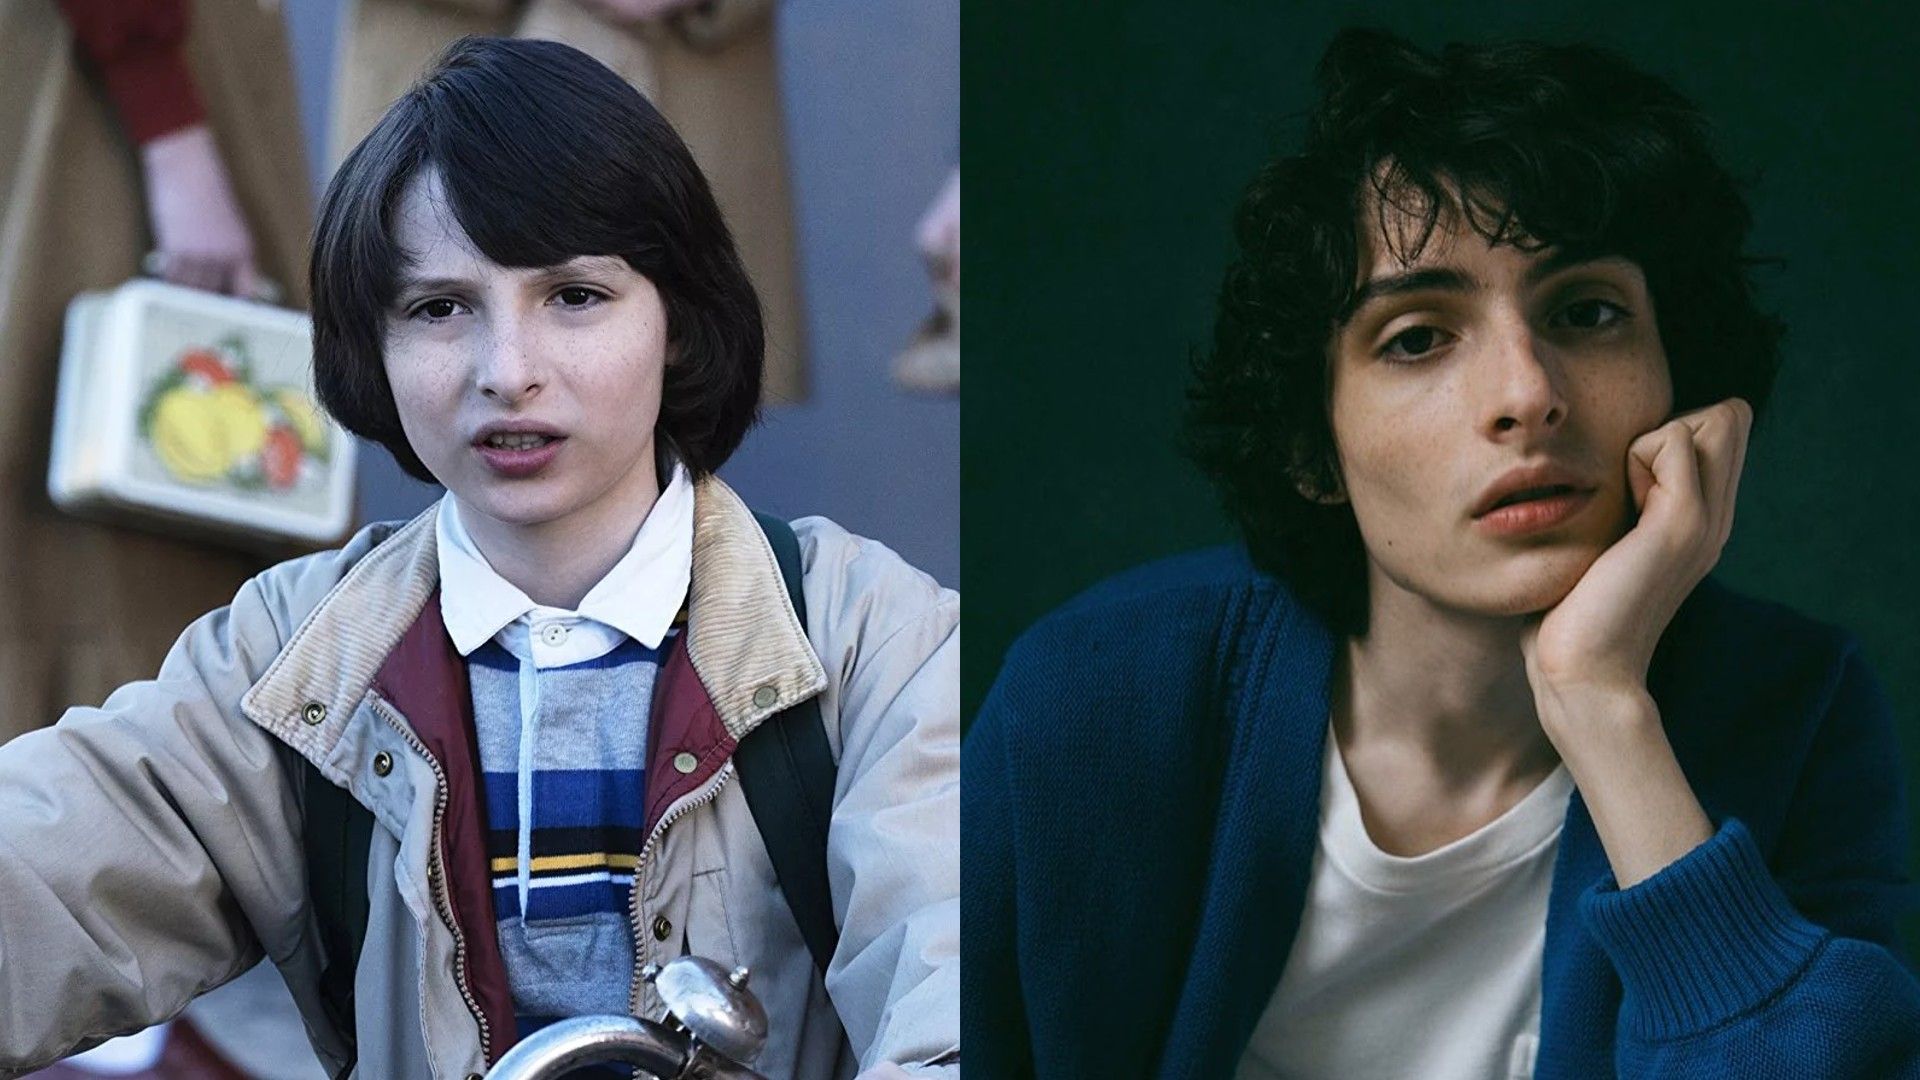 Finn Wolfhard in the first season of Strangler Things and now